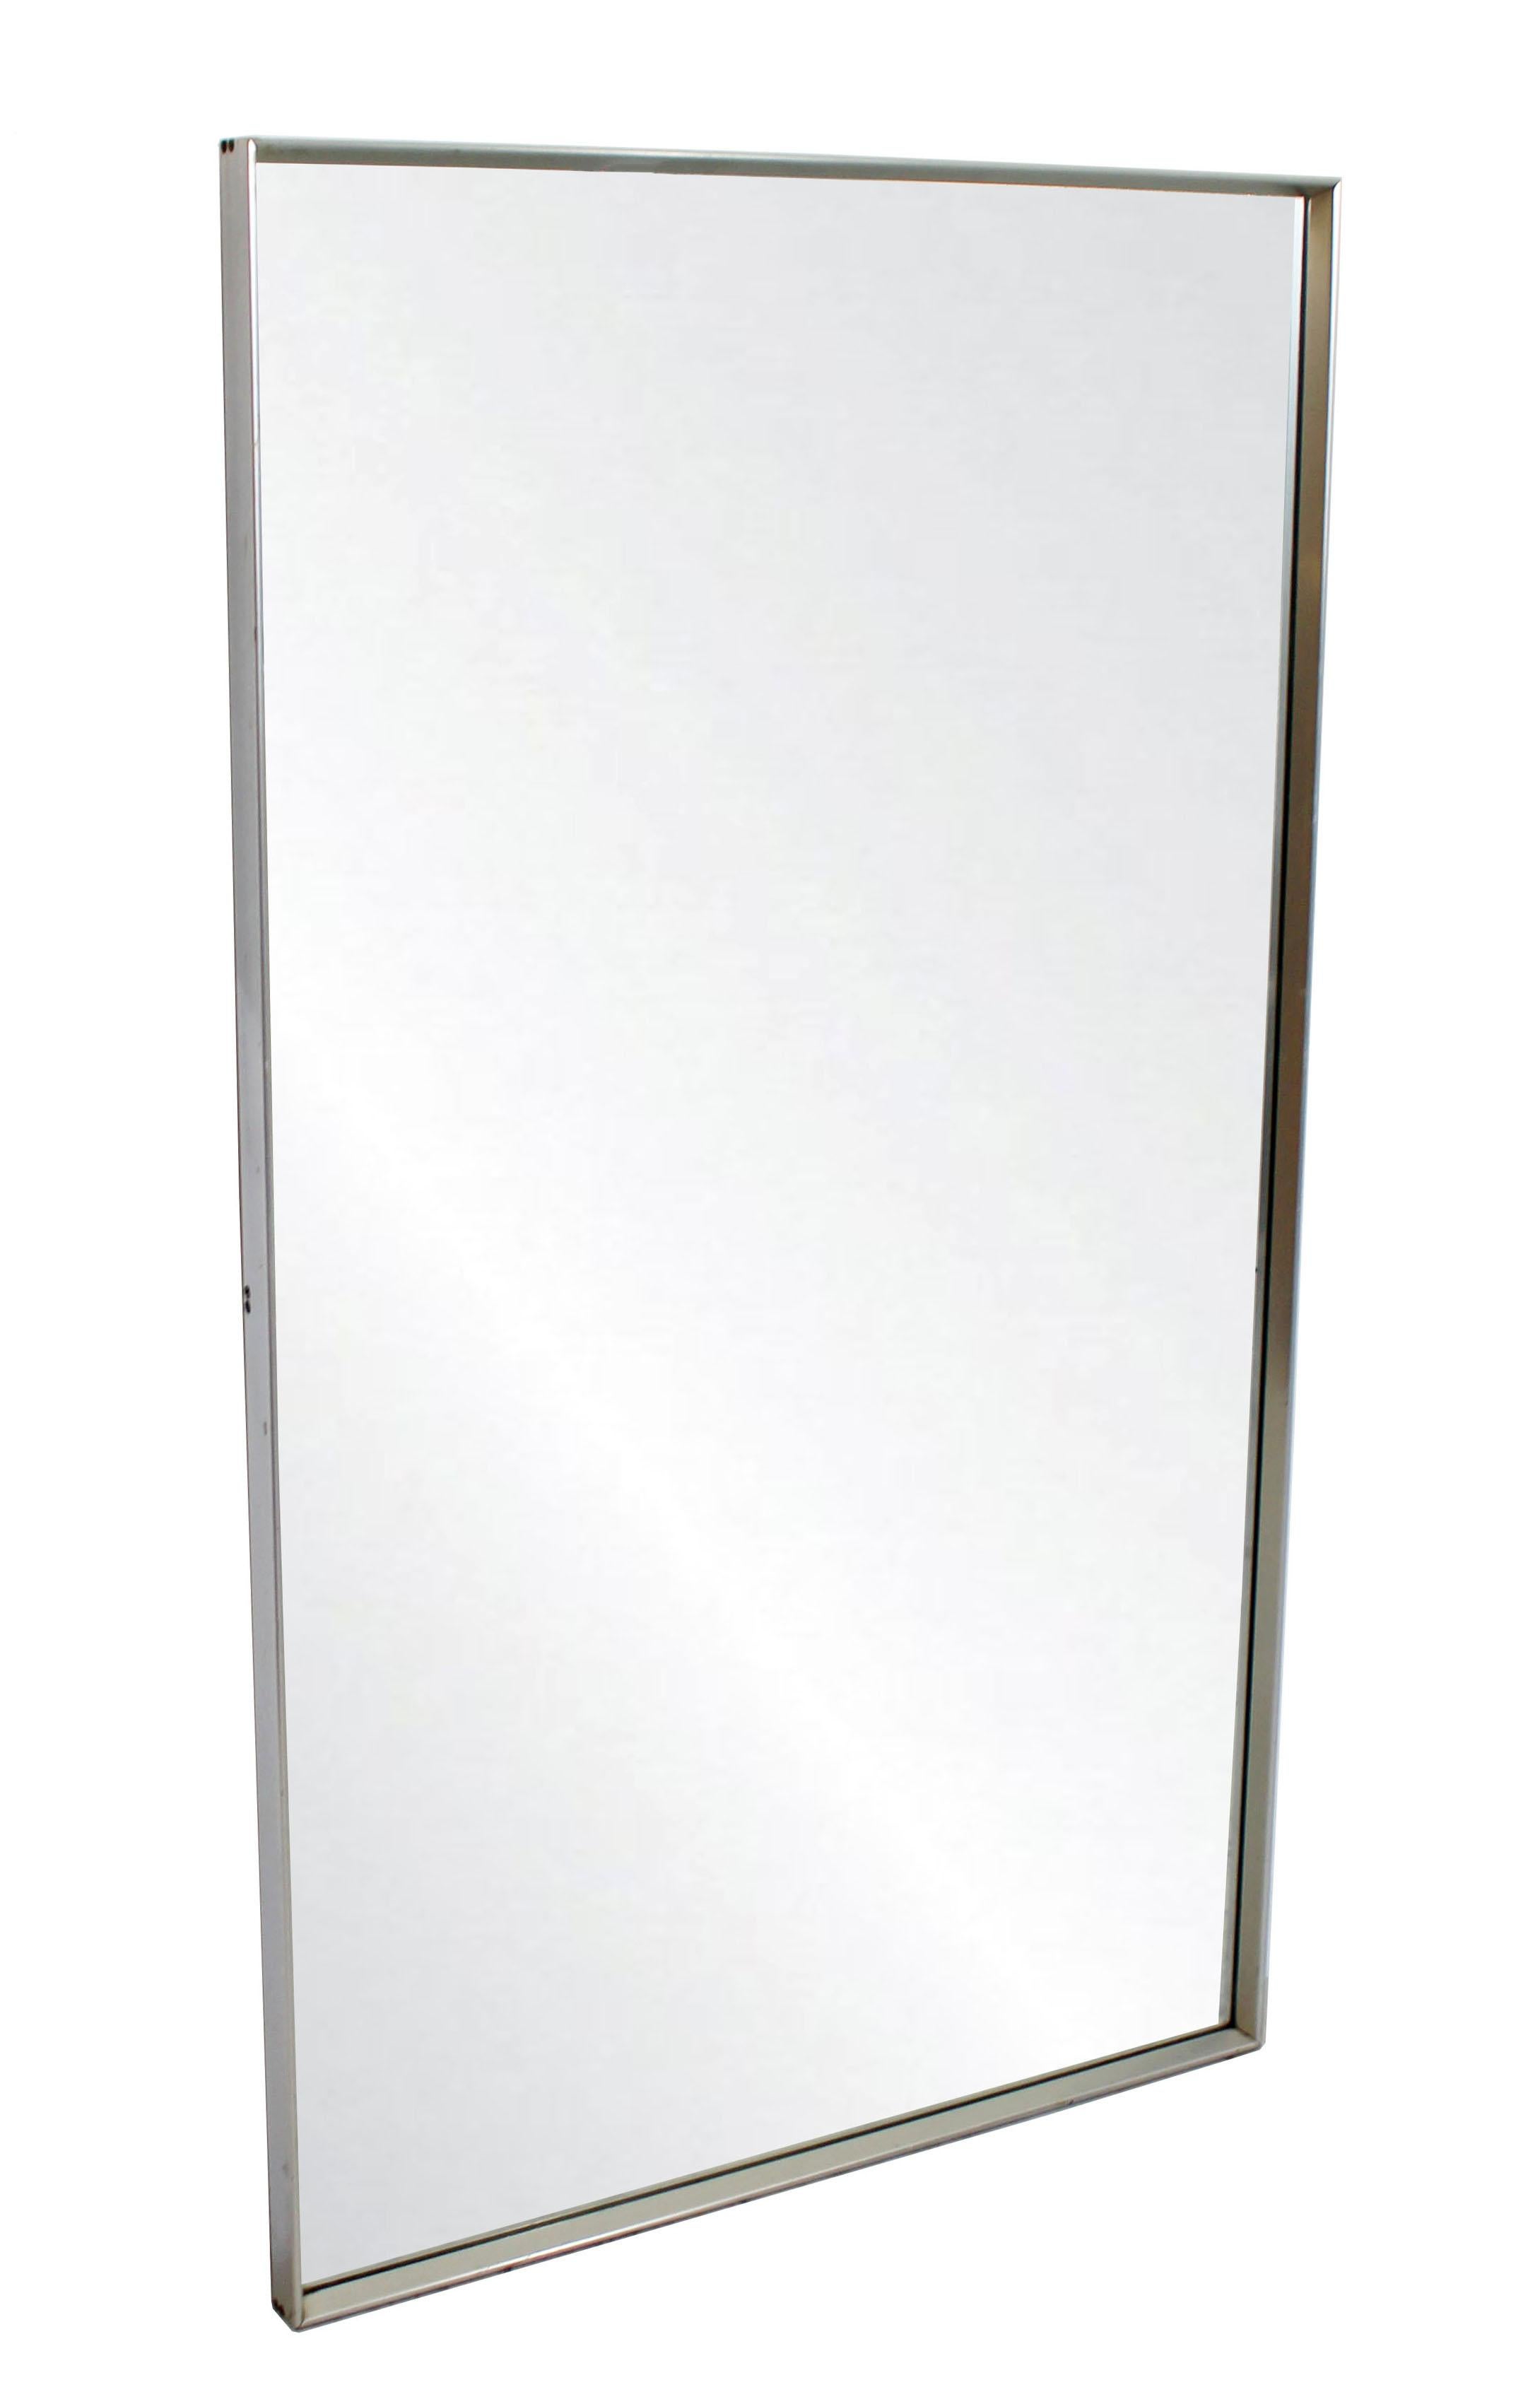 For your consideration is a minimal, chrome-plated, rectangular, wall mirror by Mirror Hart Company, circa 1960s. In excellent condition. The dimensions are 32.5